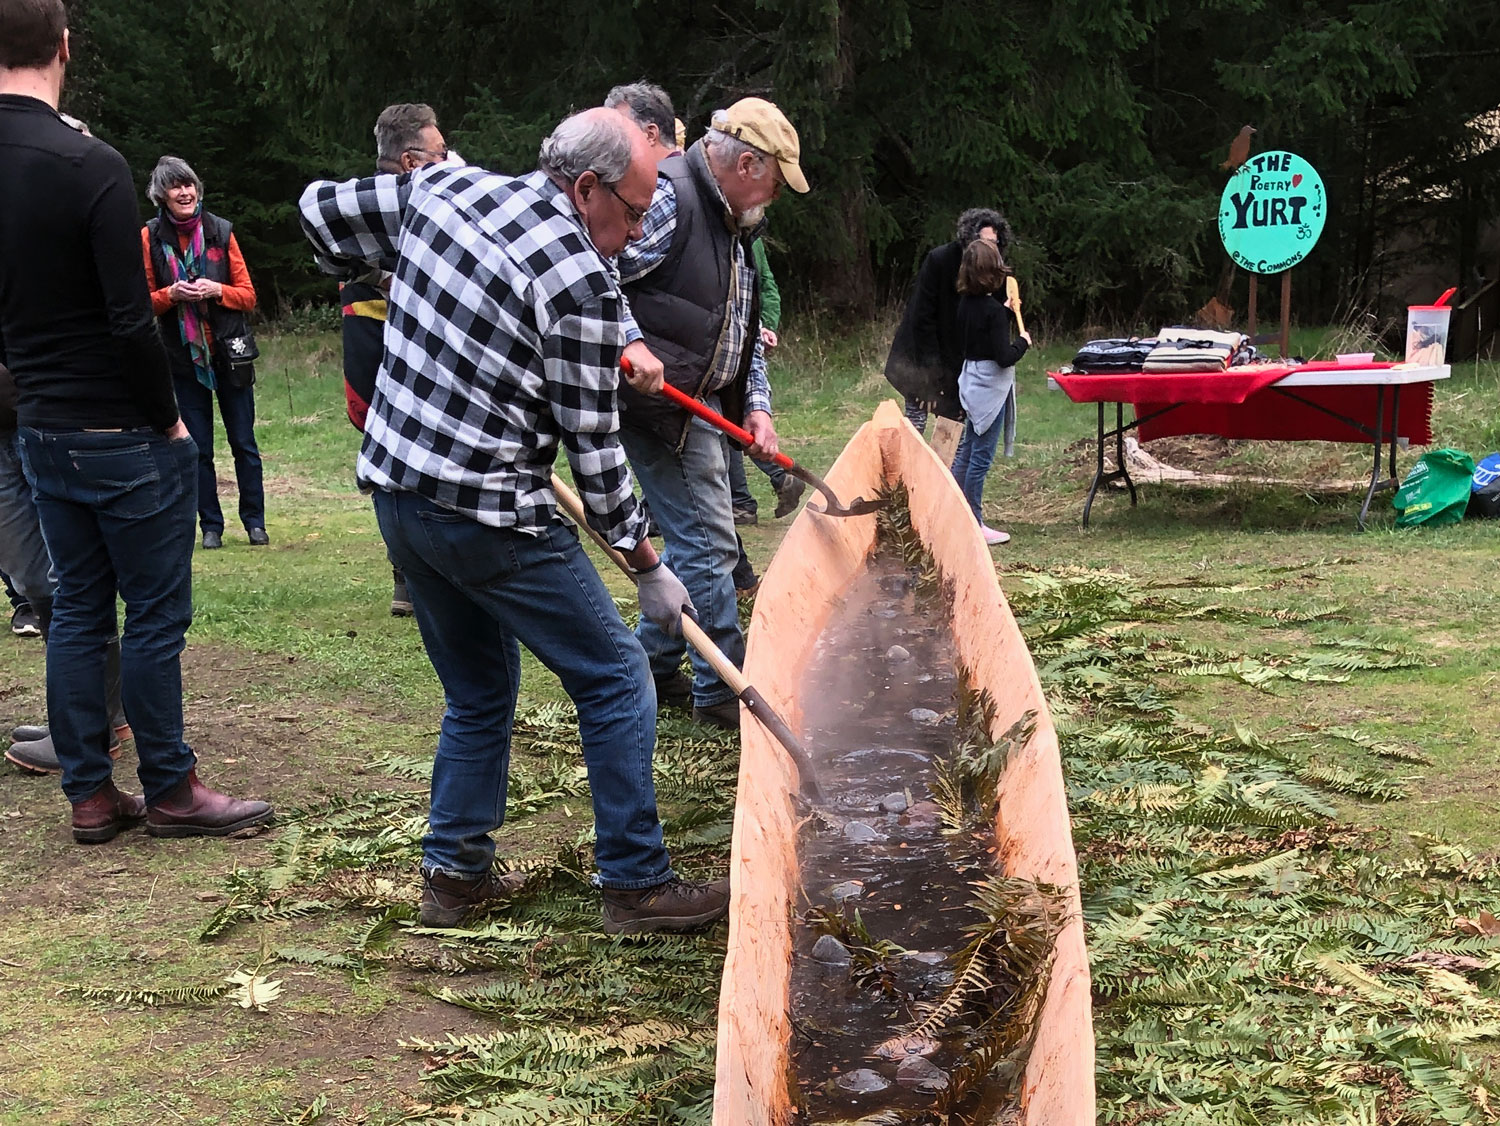 Two men use shovels to remove rocks from hot water in a traditionally crafted cedar canoe, as part of the process of using steam to spread the sides of the canoe into its desired shape.